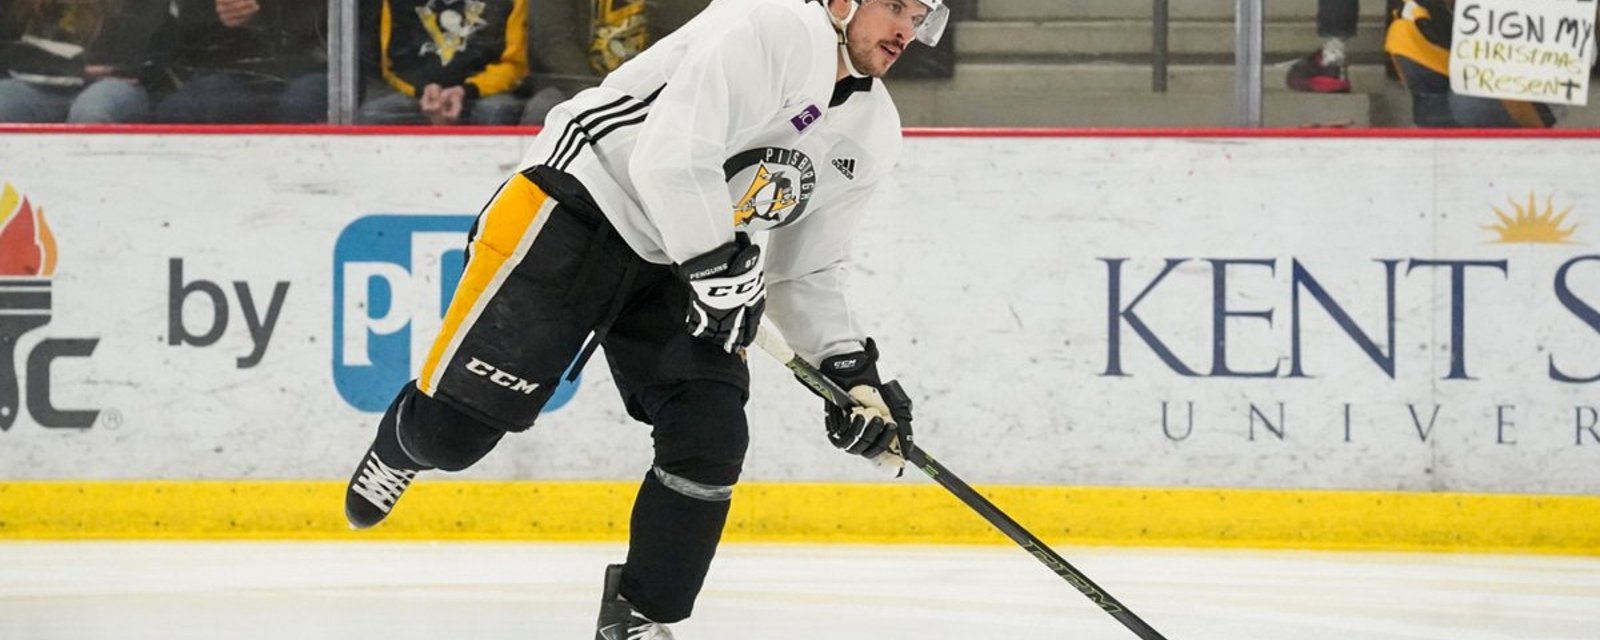 Disappointing update on Crosby’s health and possible return